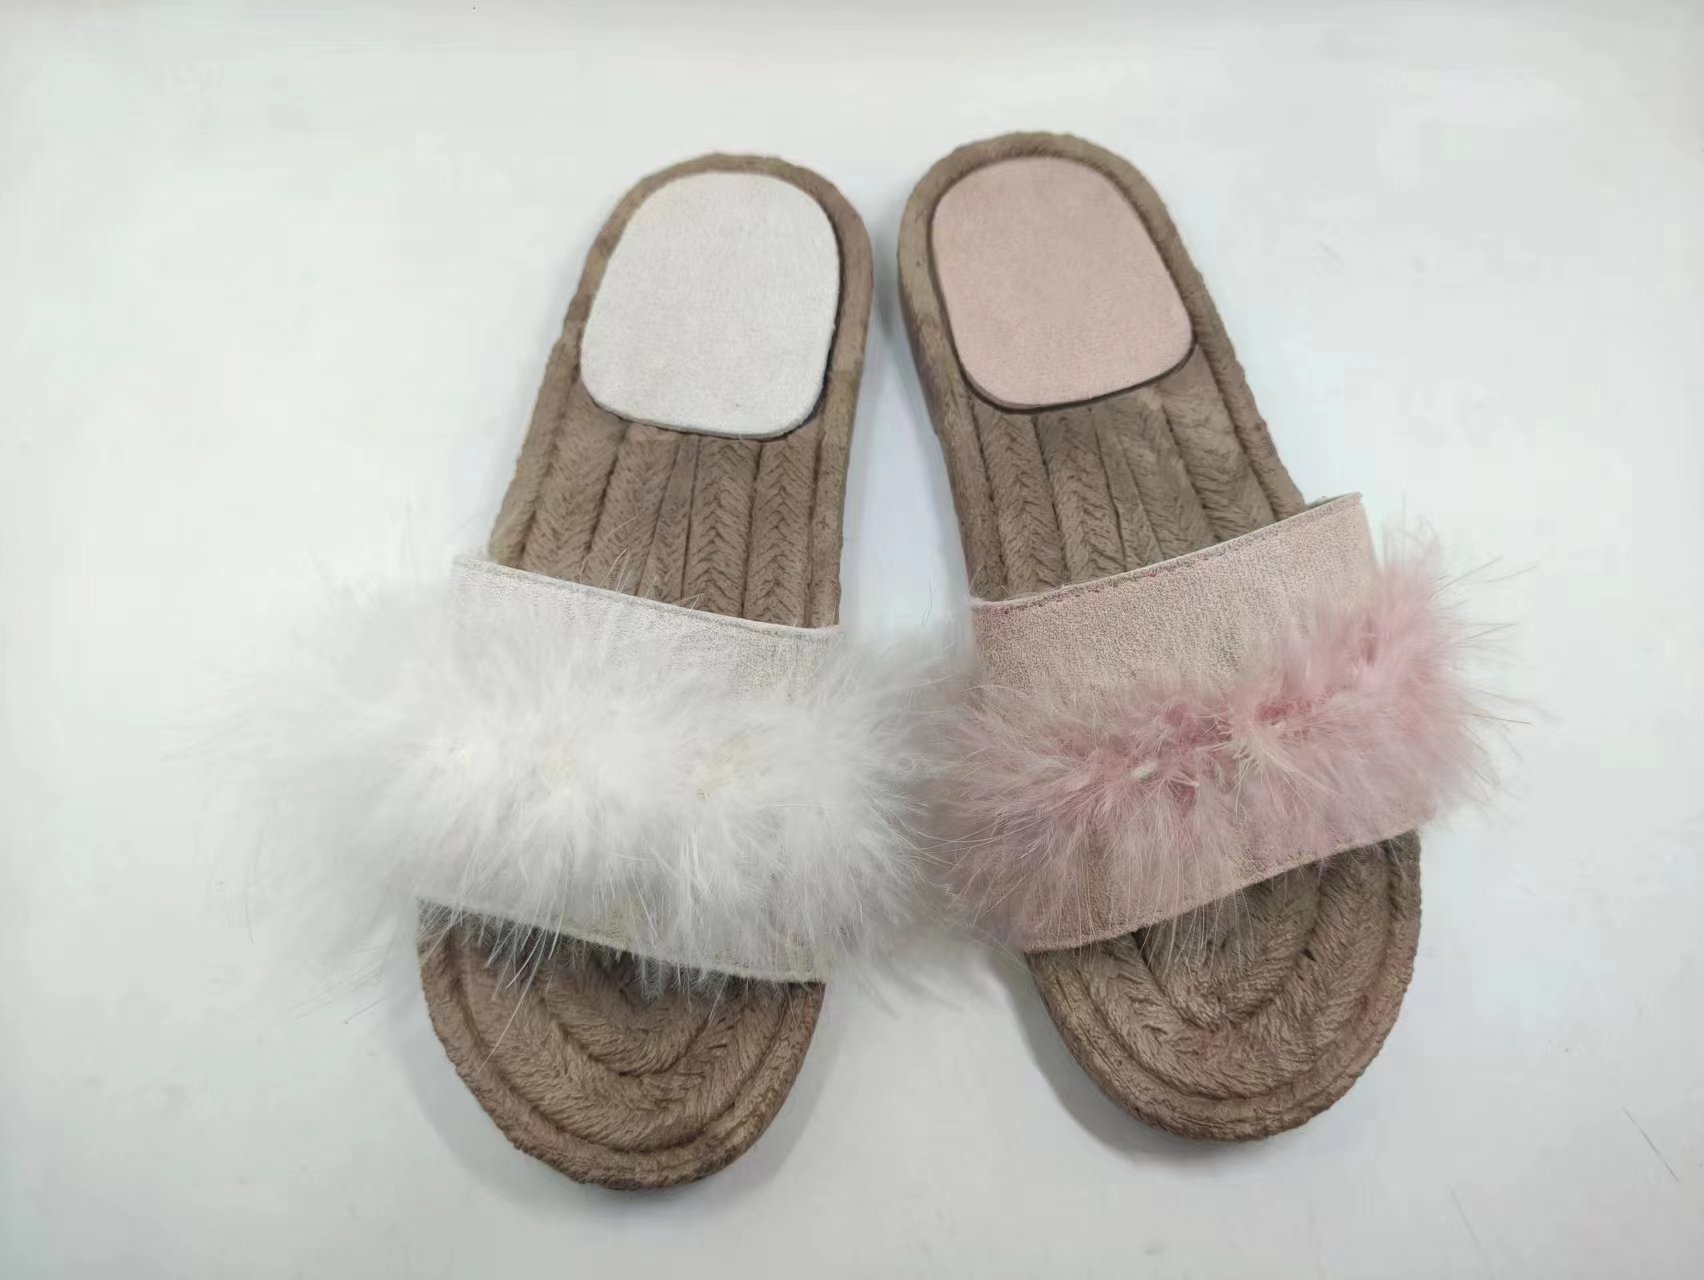 Women's Girls' Sandals Fashion Slides Decorated With Fur On Upper  